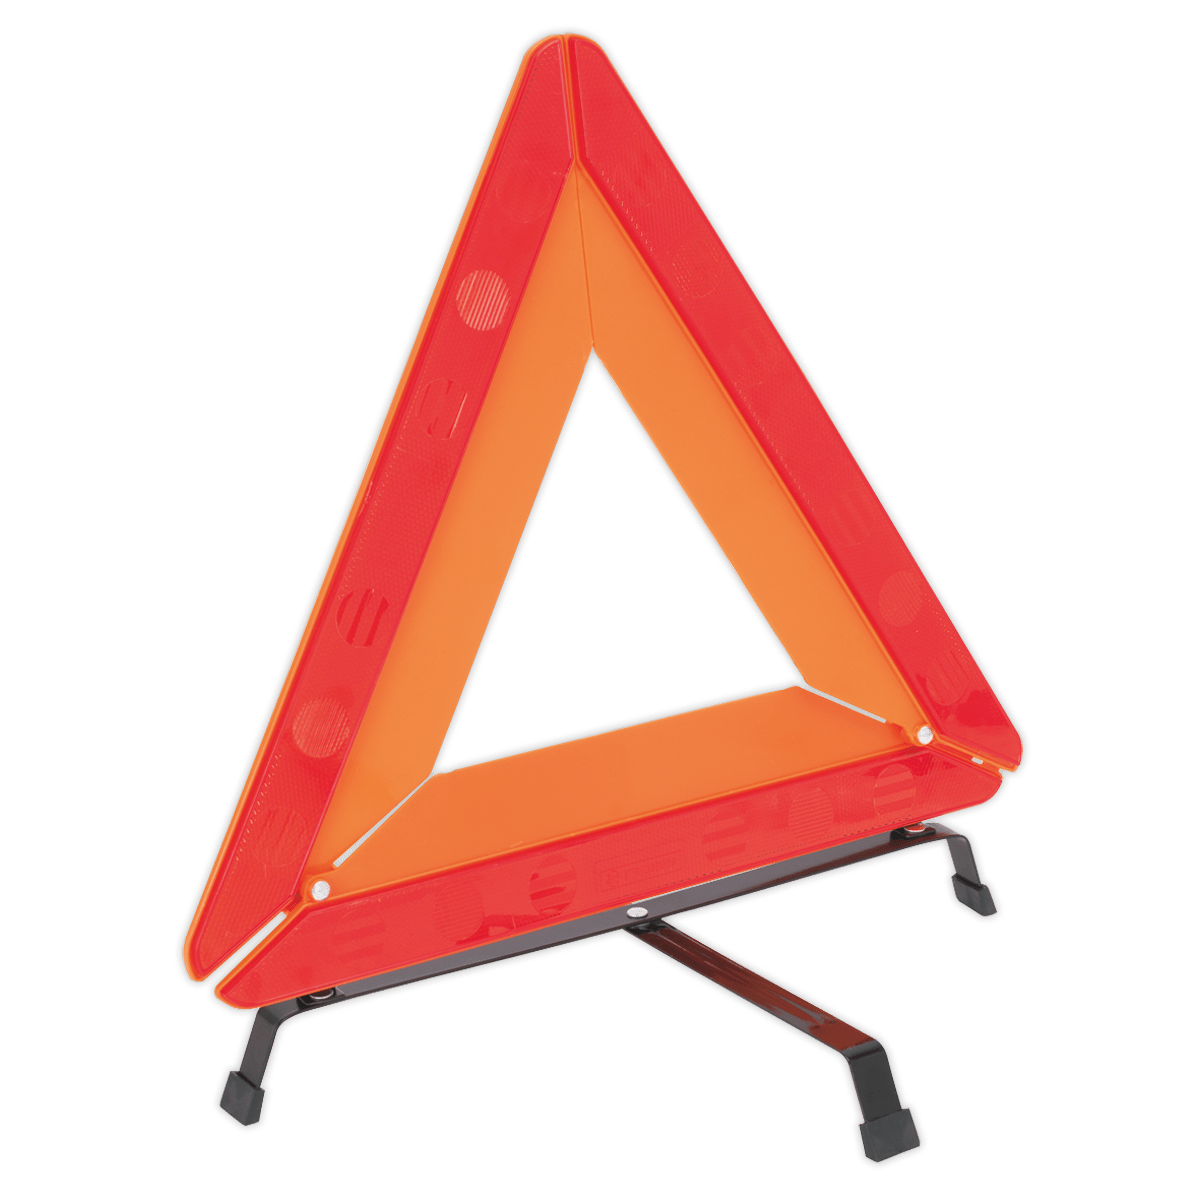 Sealey Warning Triangle CE Approved